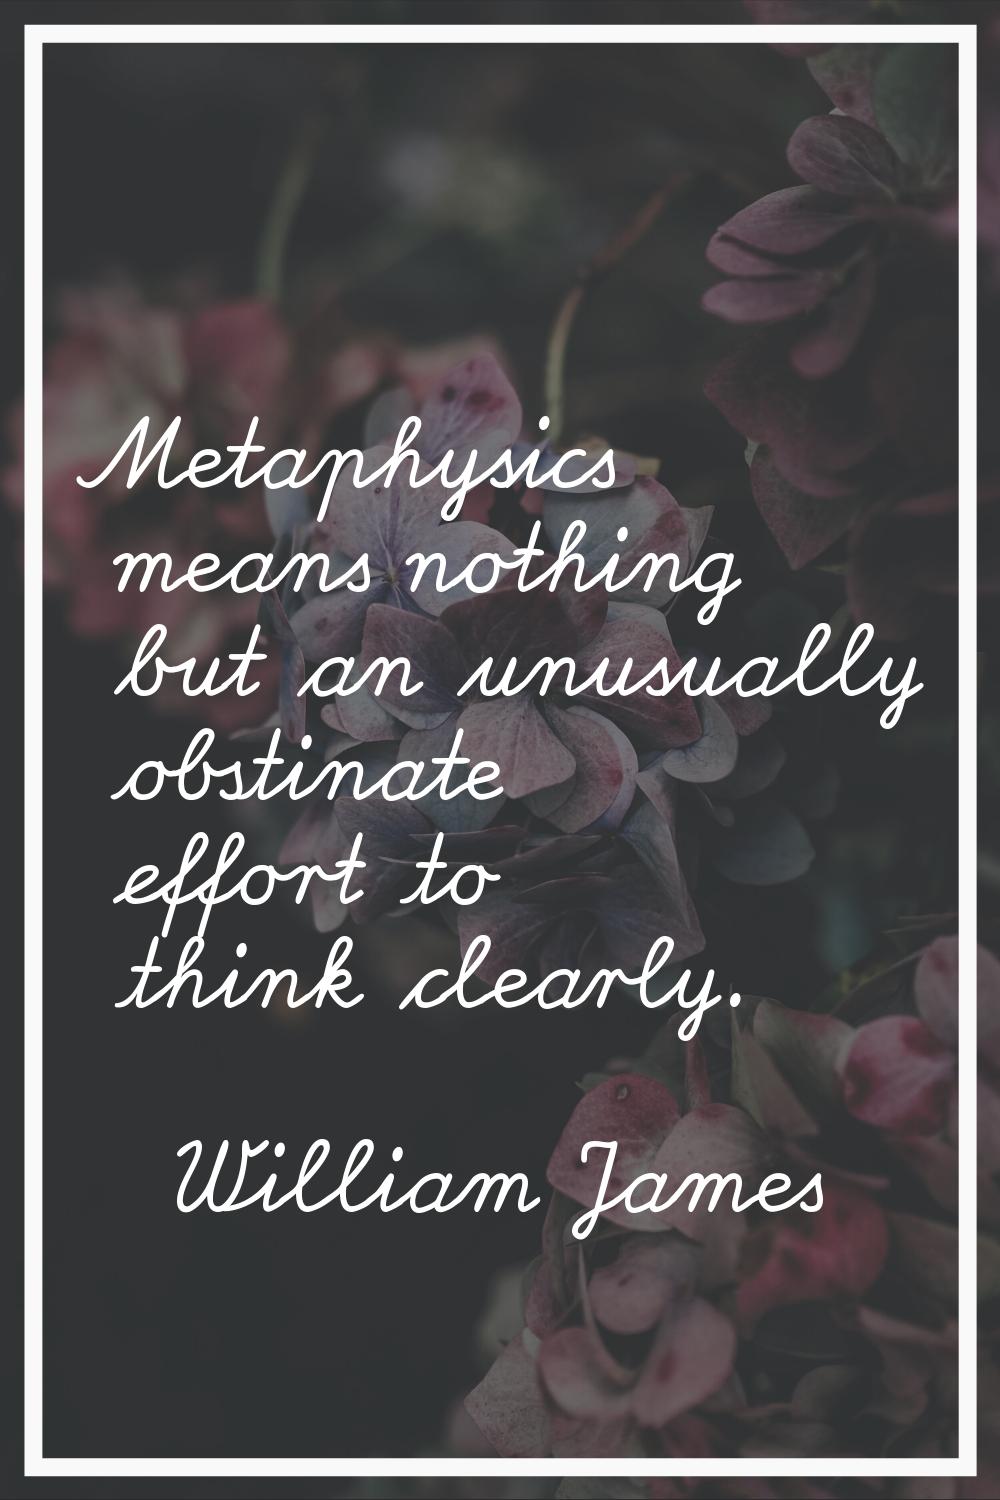 Metaphysics means nothing but an unusually obstinate effort to think clearly.